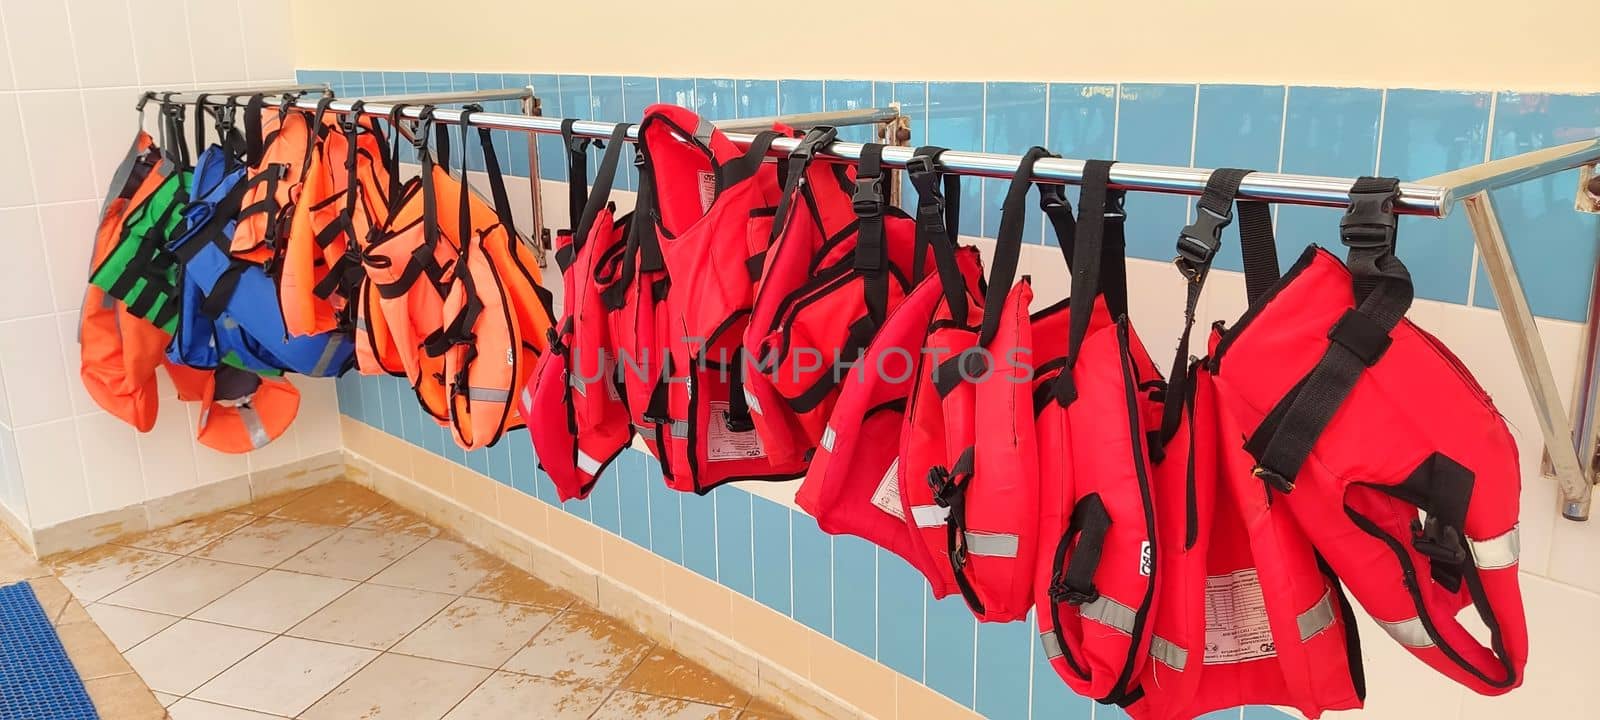 Several red and orange life jackets hang on a hanger, near the gouboi tile wall by Zakharova